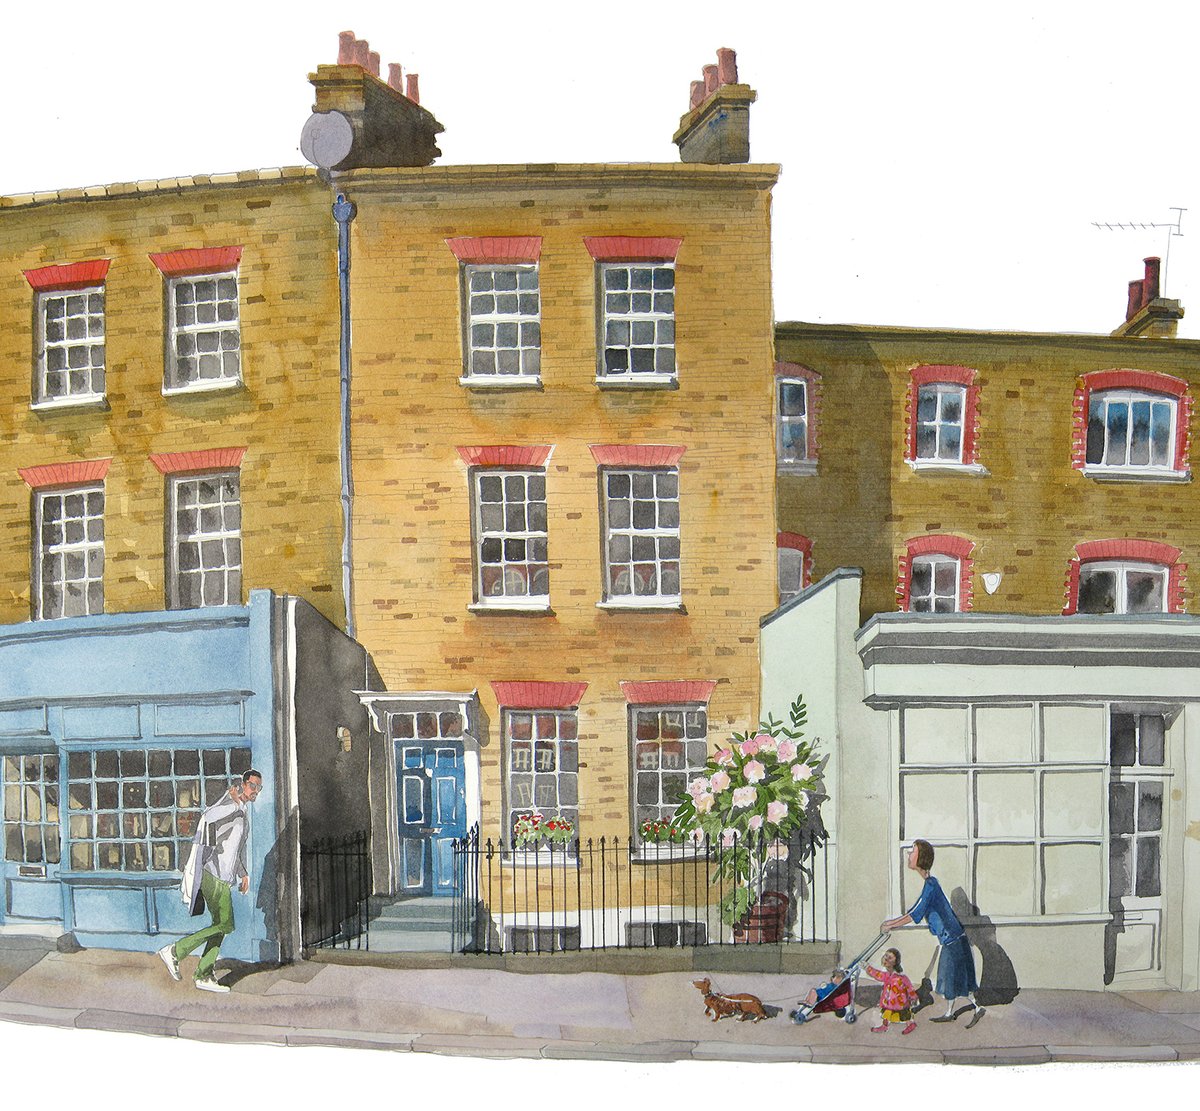 A #painting of Royal Hill in #Greenwich. A lovely bit of yellow London brick! You see more of it these days as the air is cleaner, and residents are getting rid of pebble dash and stone cladding. @GreenwichVisitr @VisitGreenwich